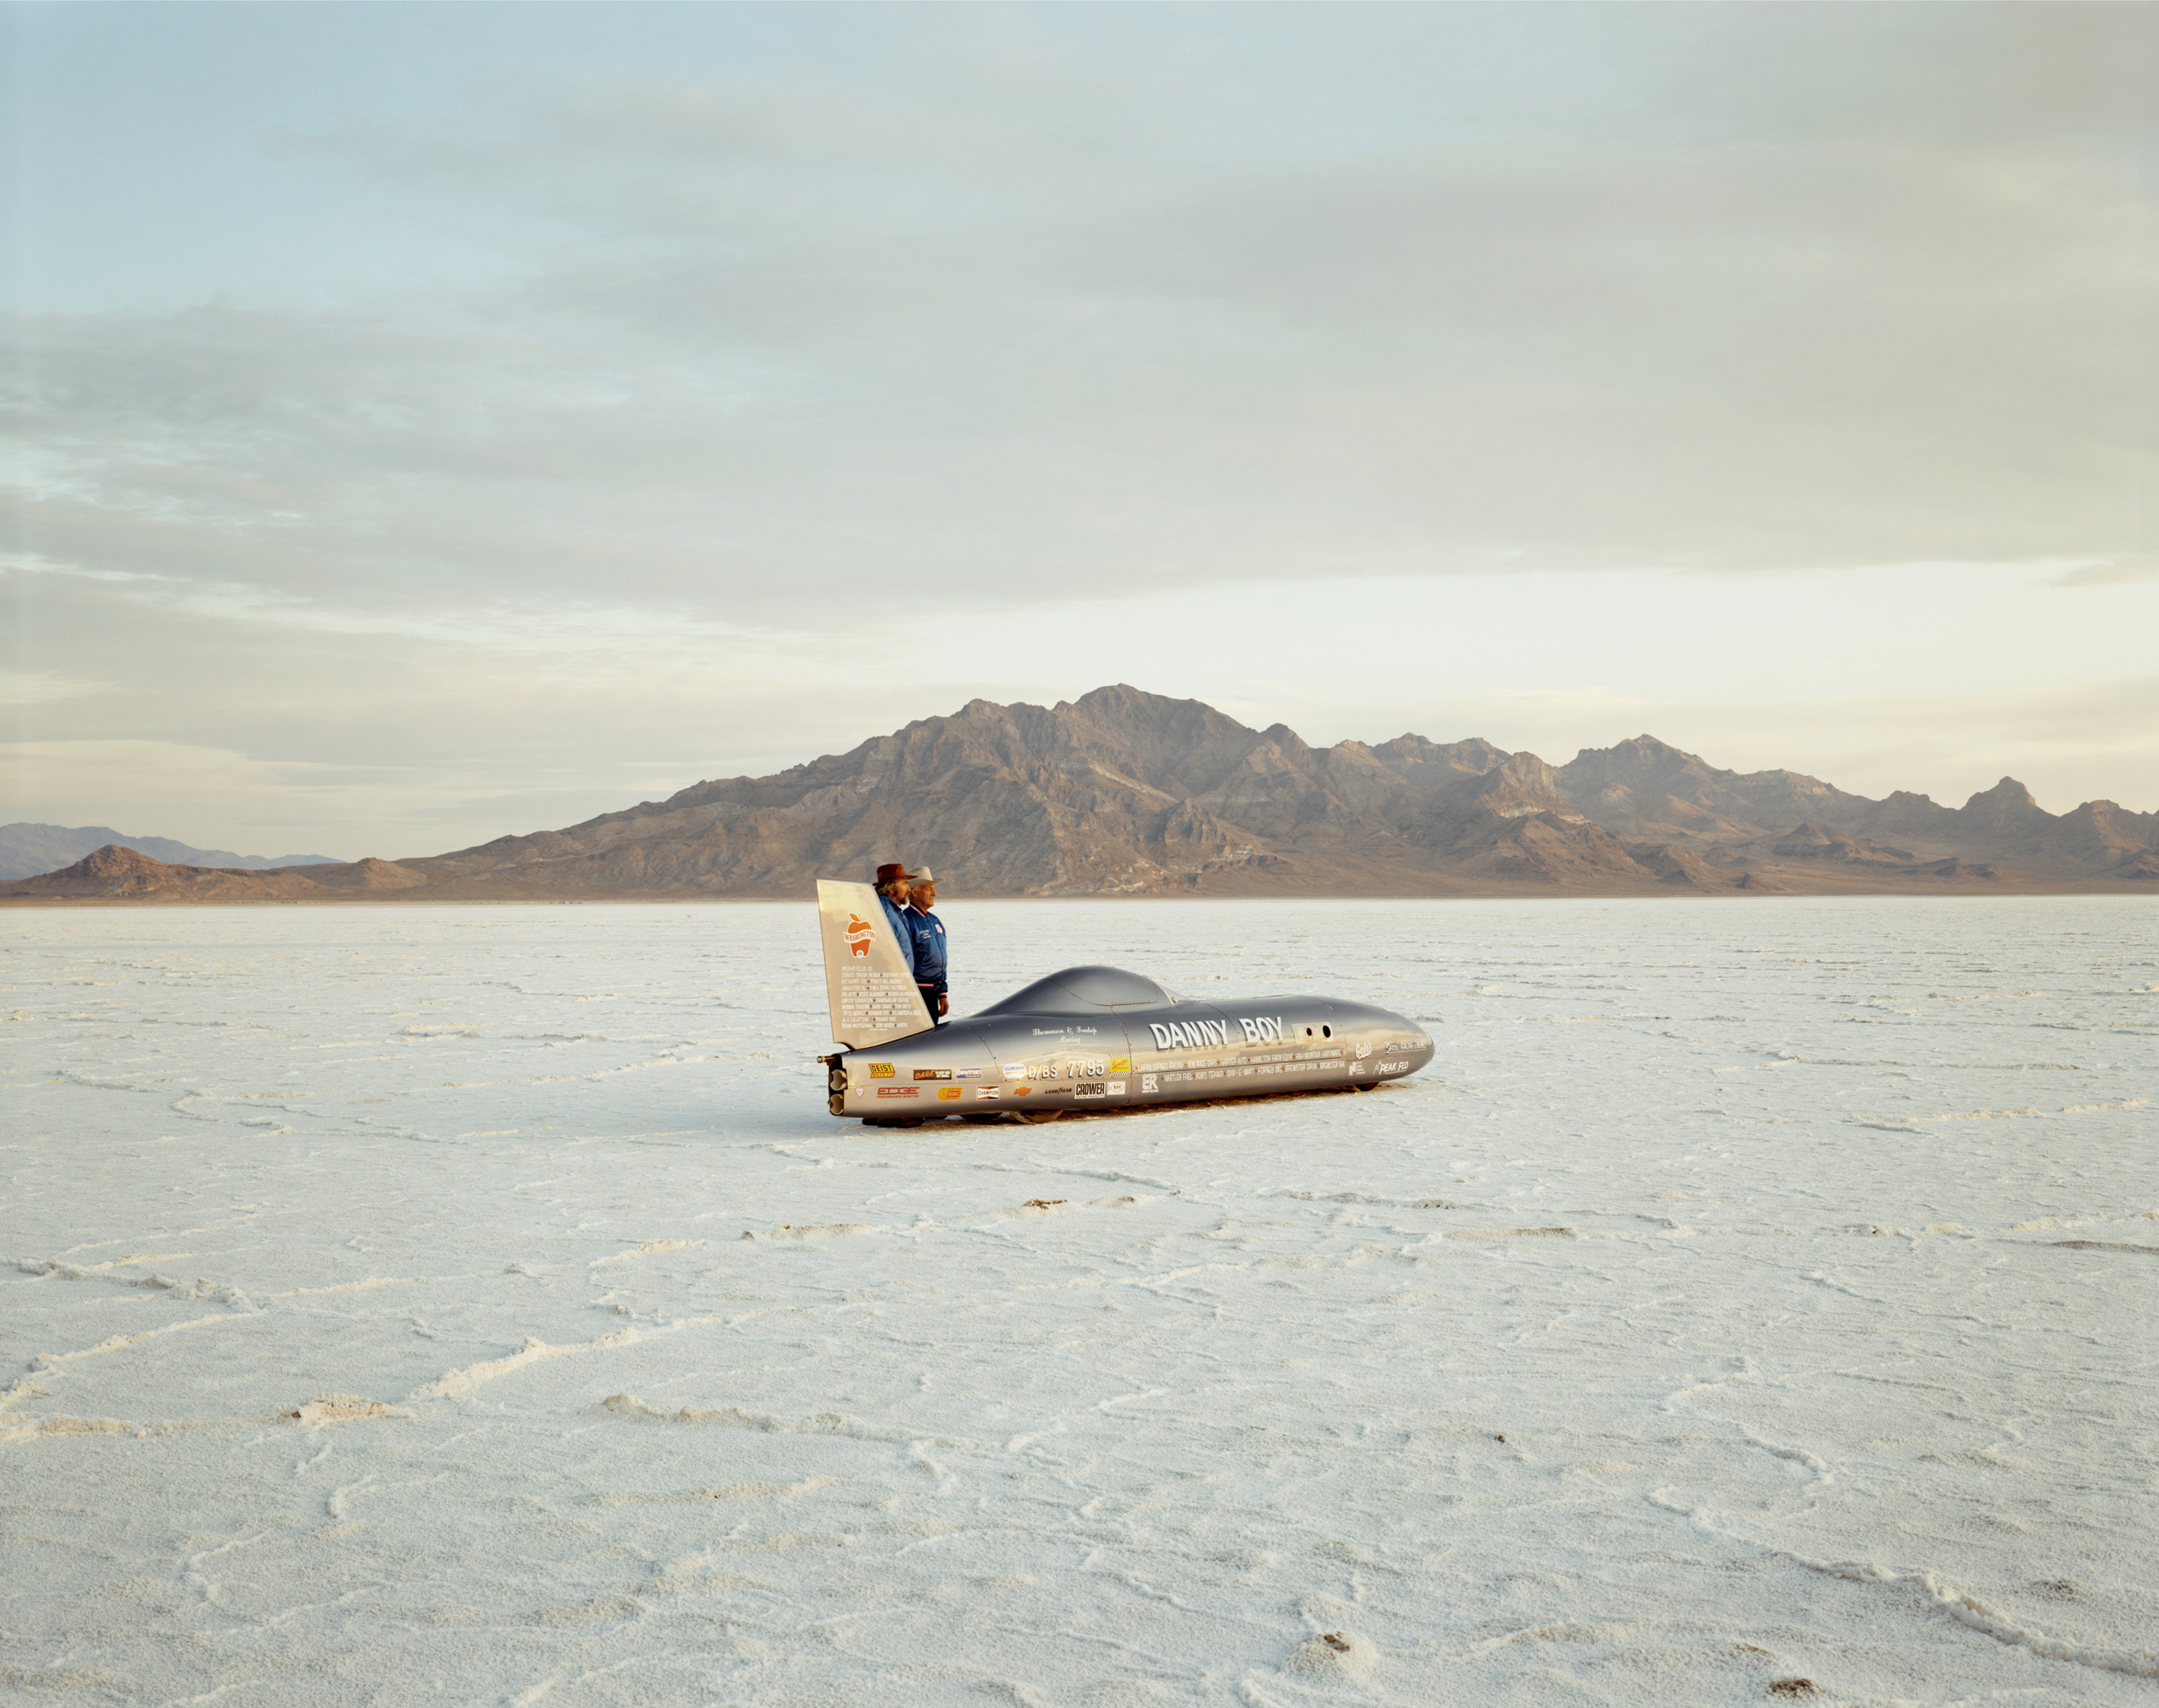 Color photograph of two figures standing by a race car in the middle of salt flats with mountains along the horizon